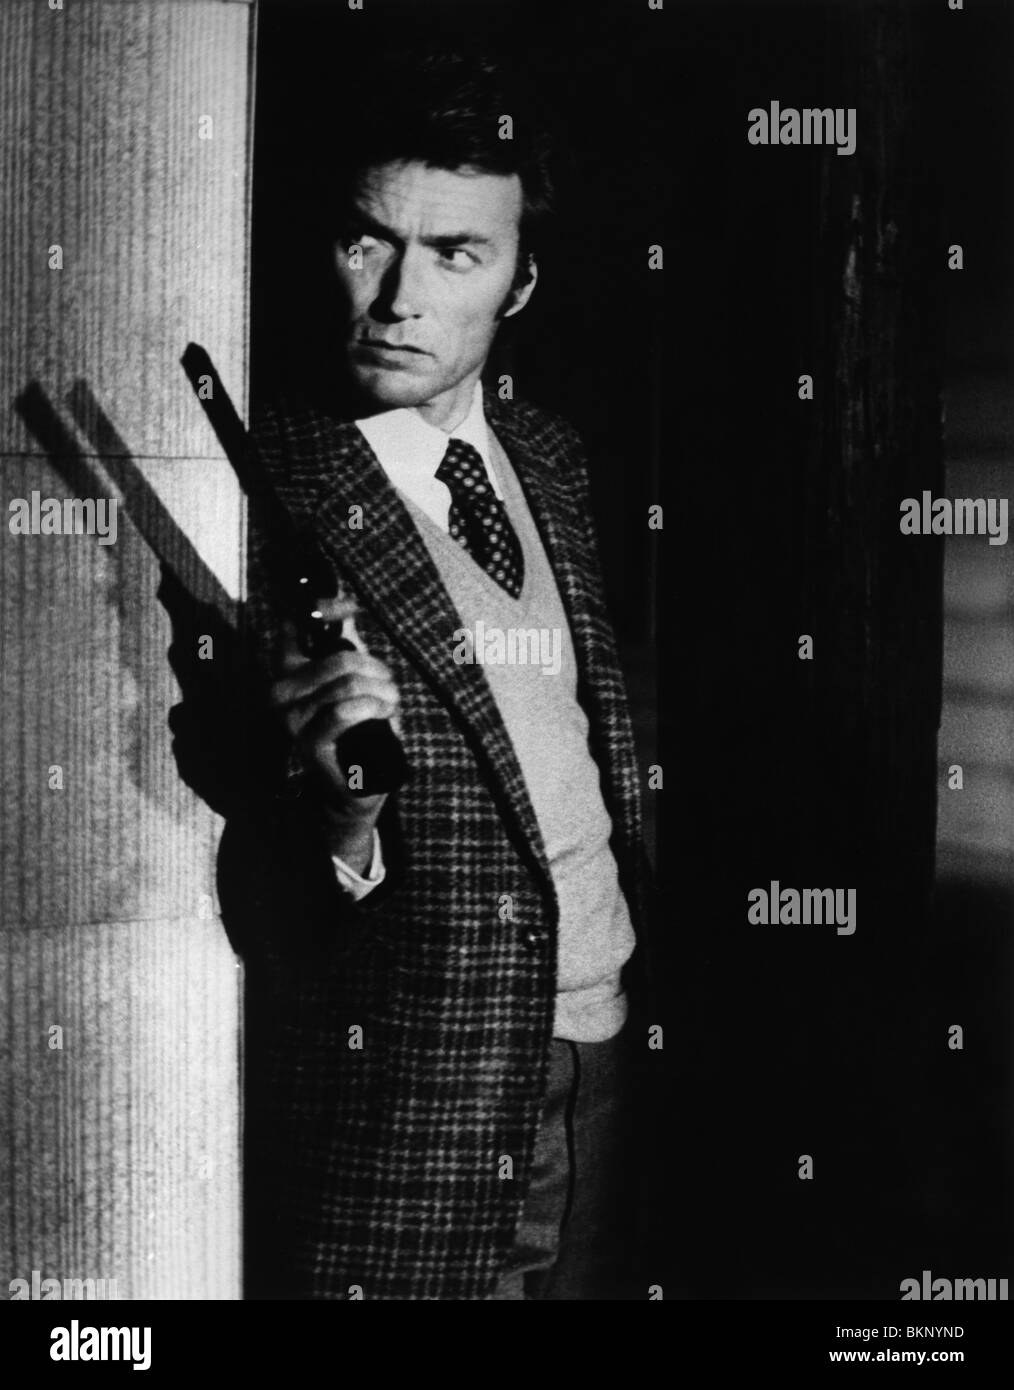 DIRTY HARRY (1971) CLINT EASTWOOD DTH 008P Stockfoto